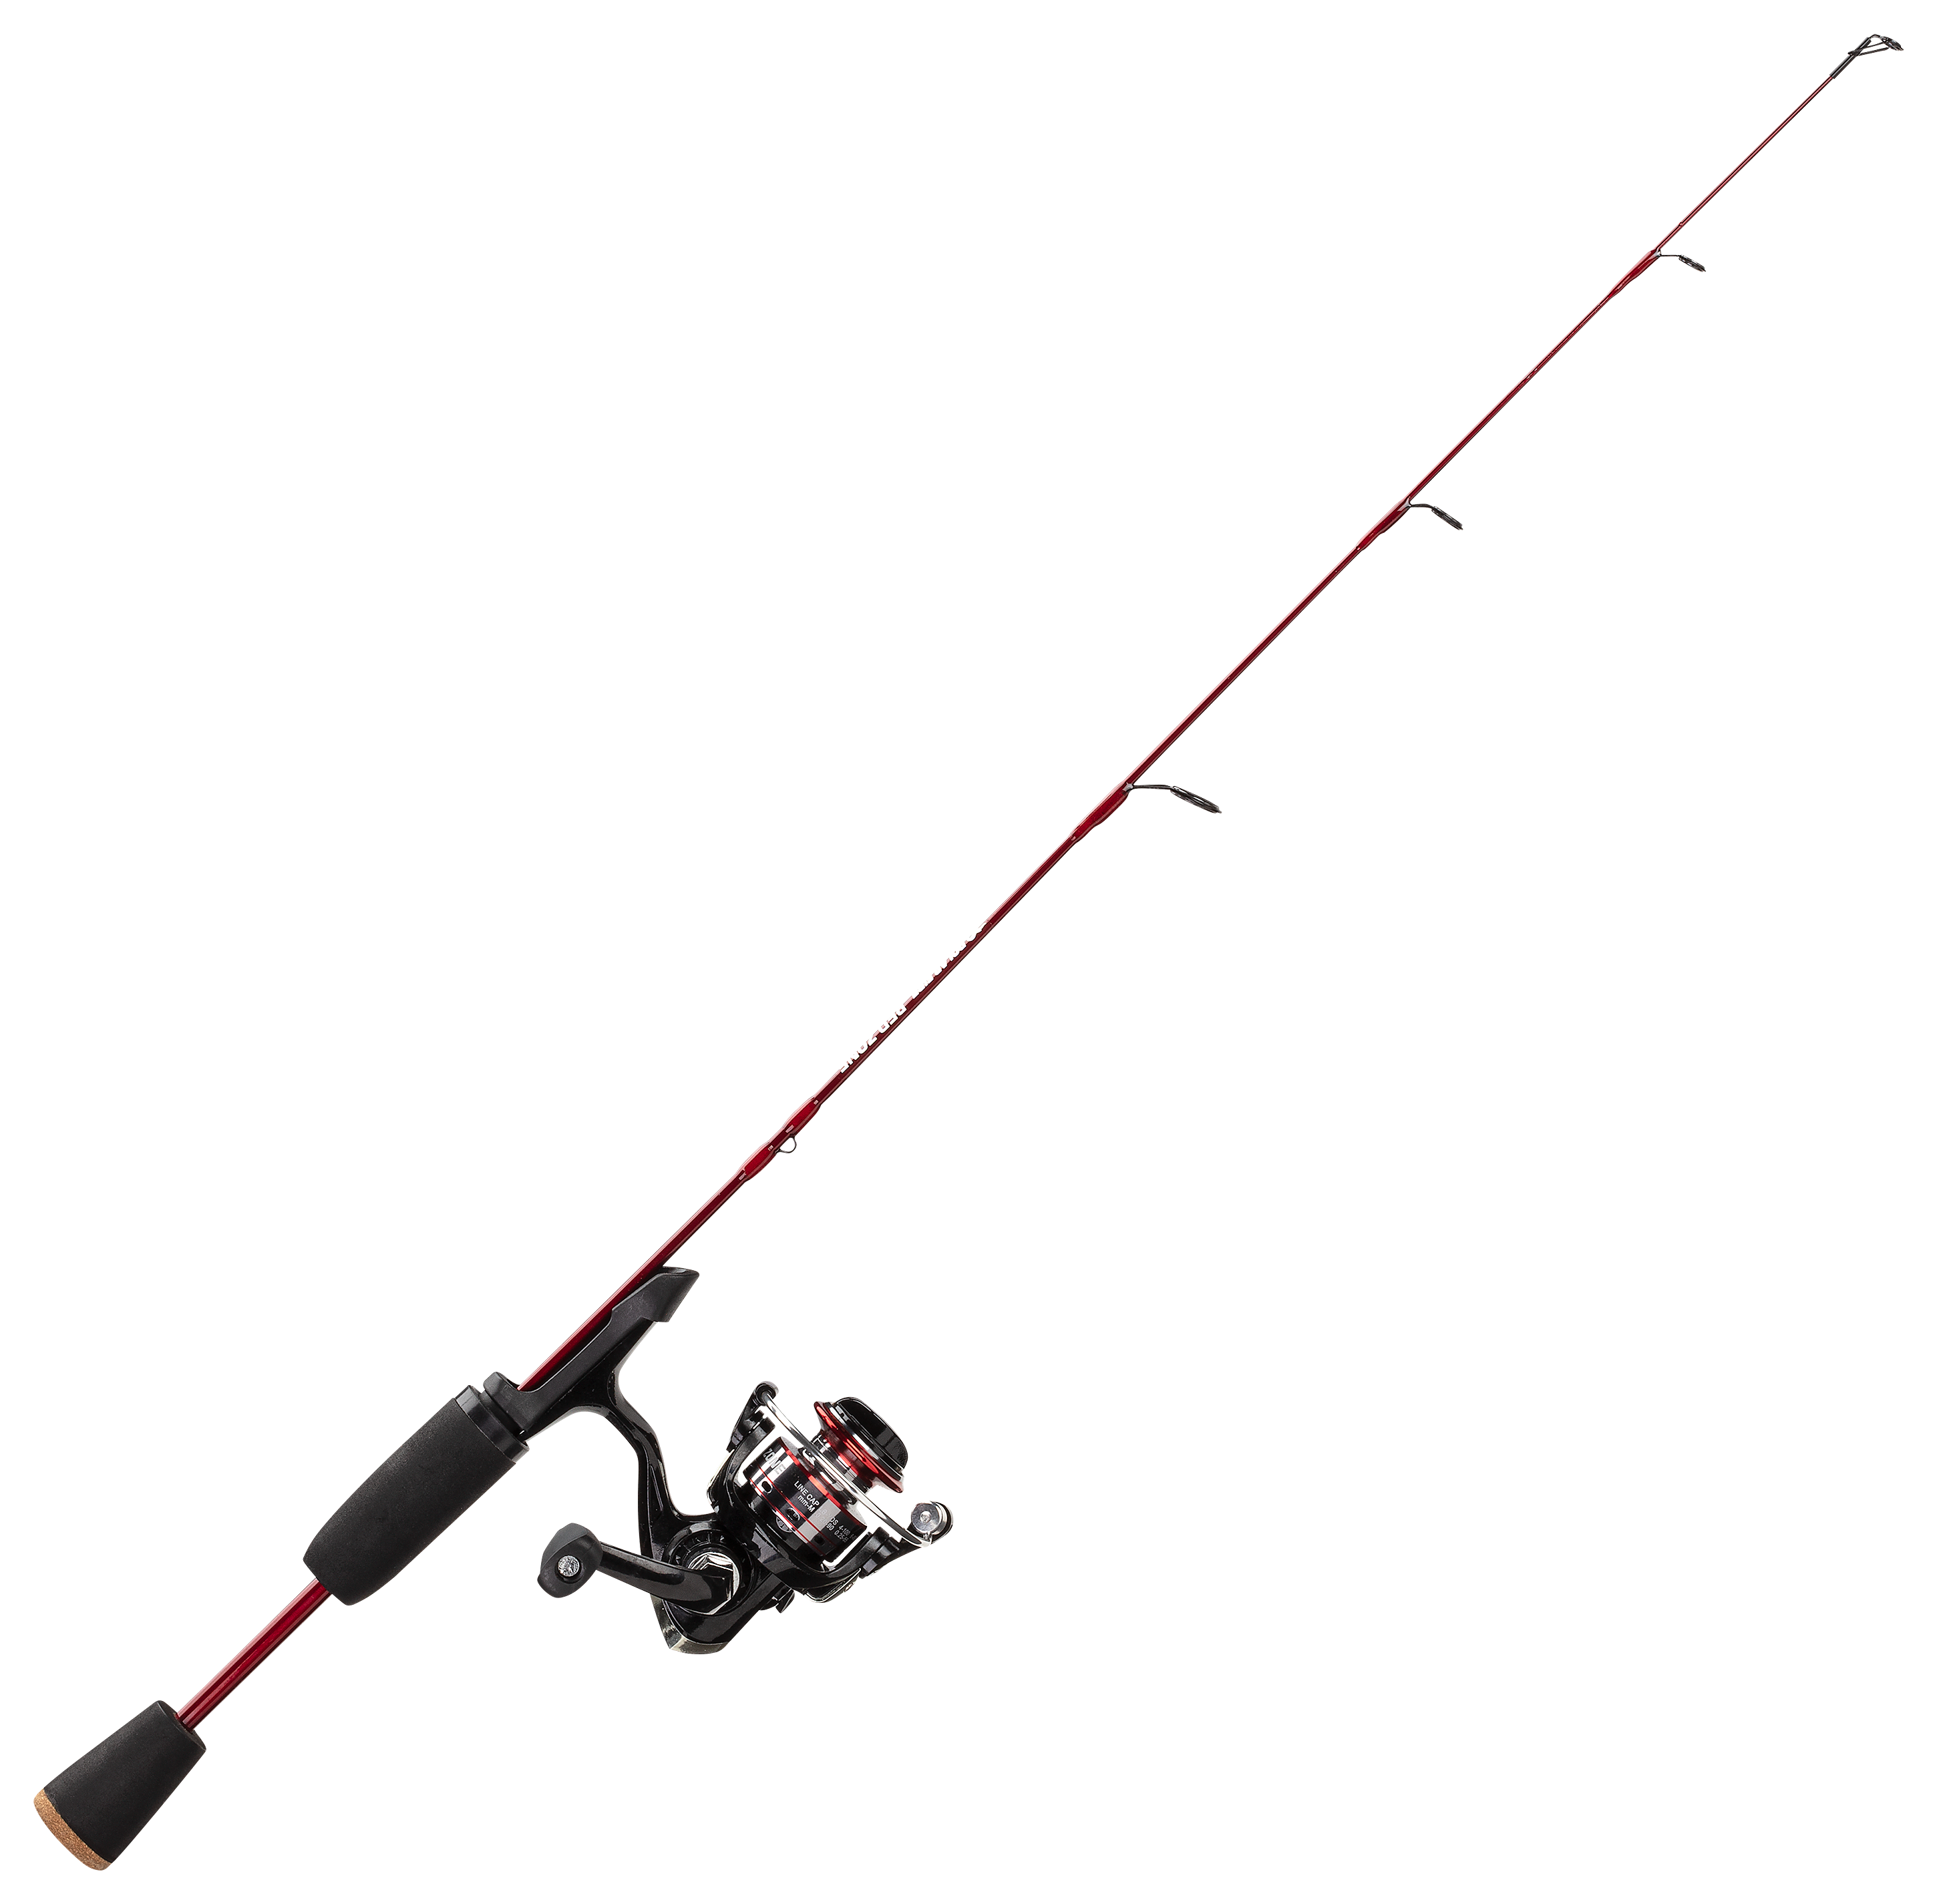 2 NEW ICE FISHING RODS HT POLAR FIRE RED ZONE Spinning Combos 26